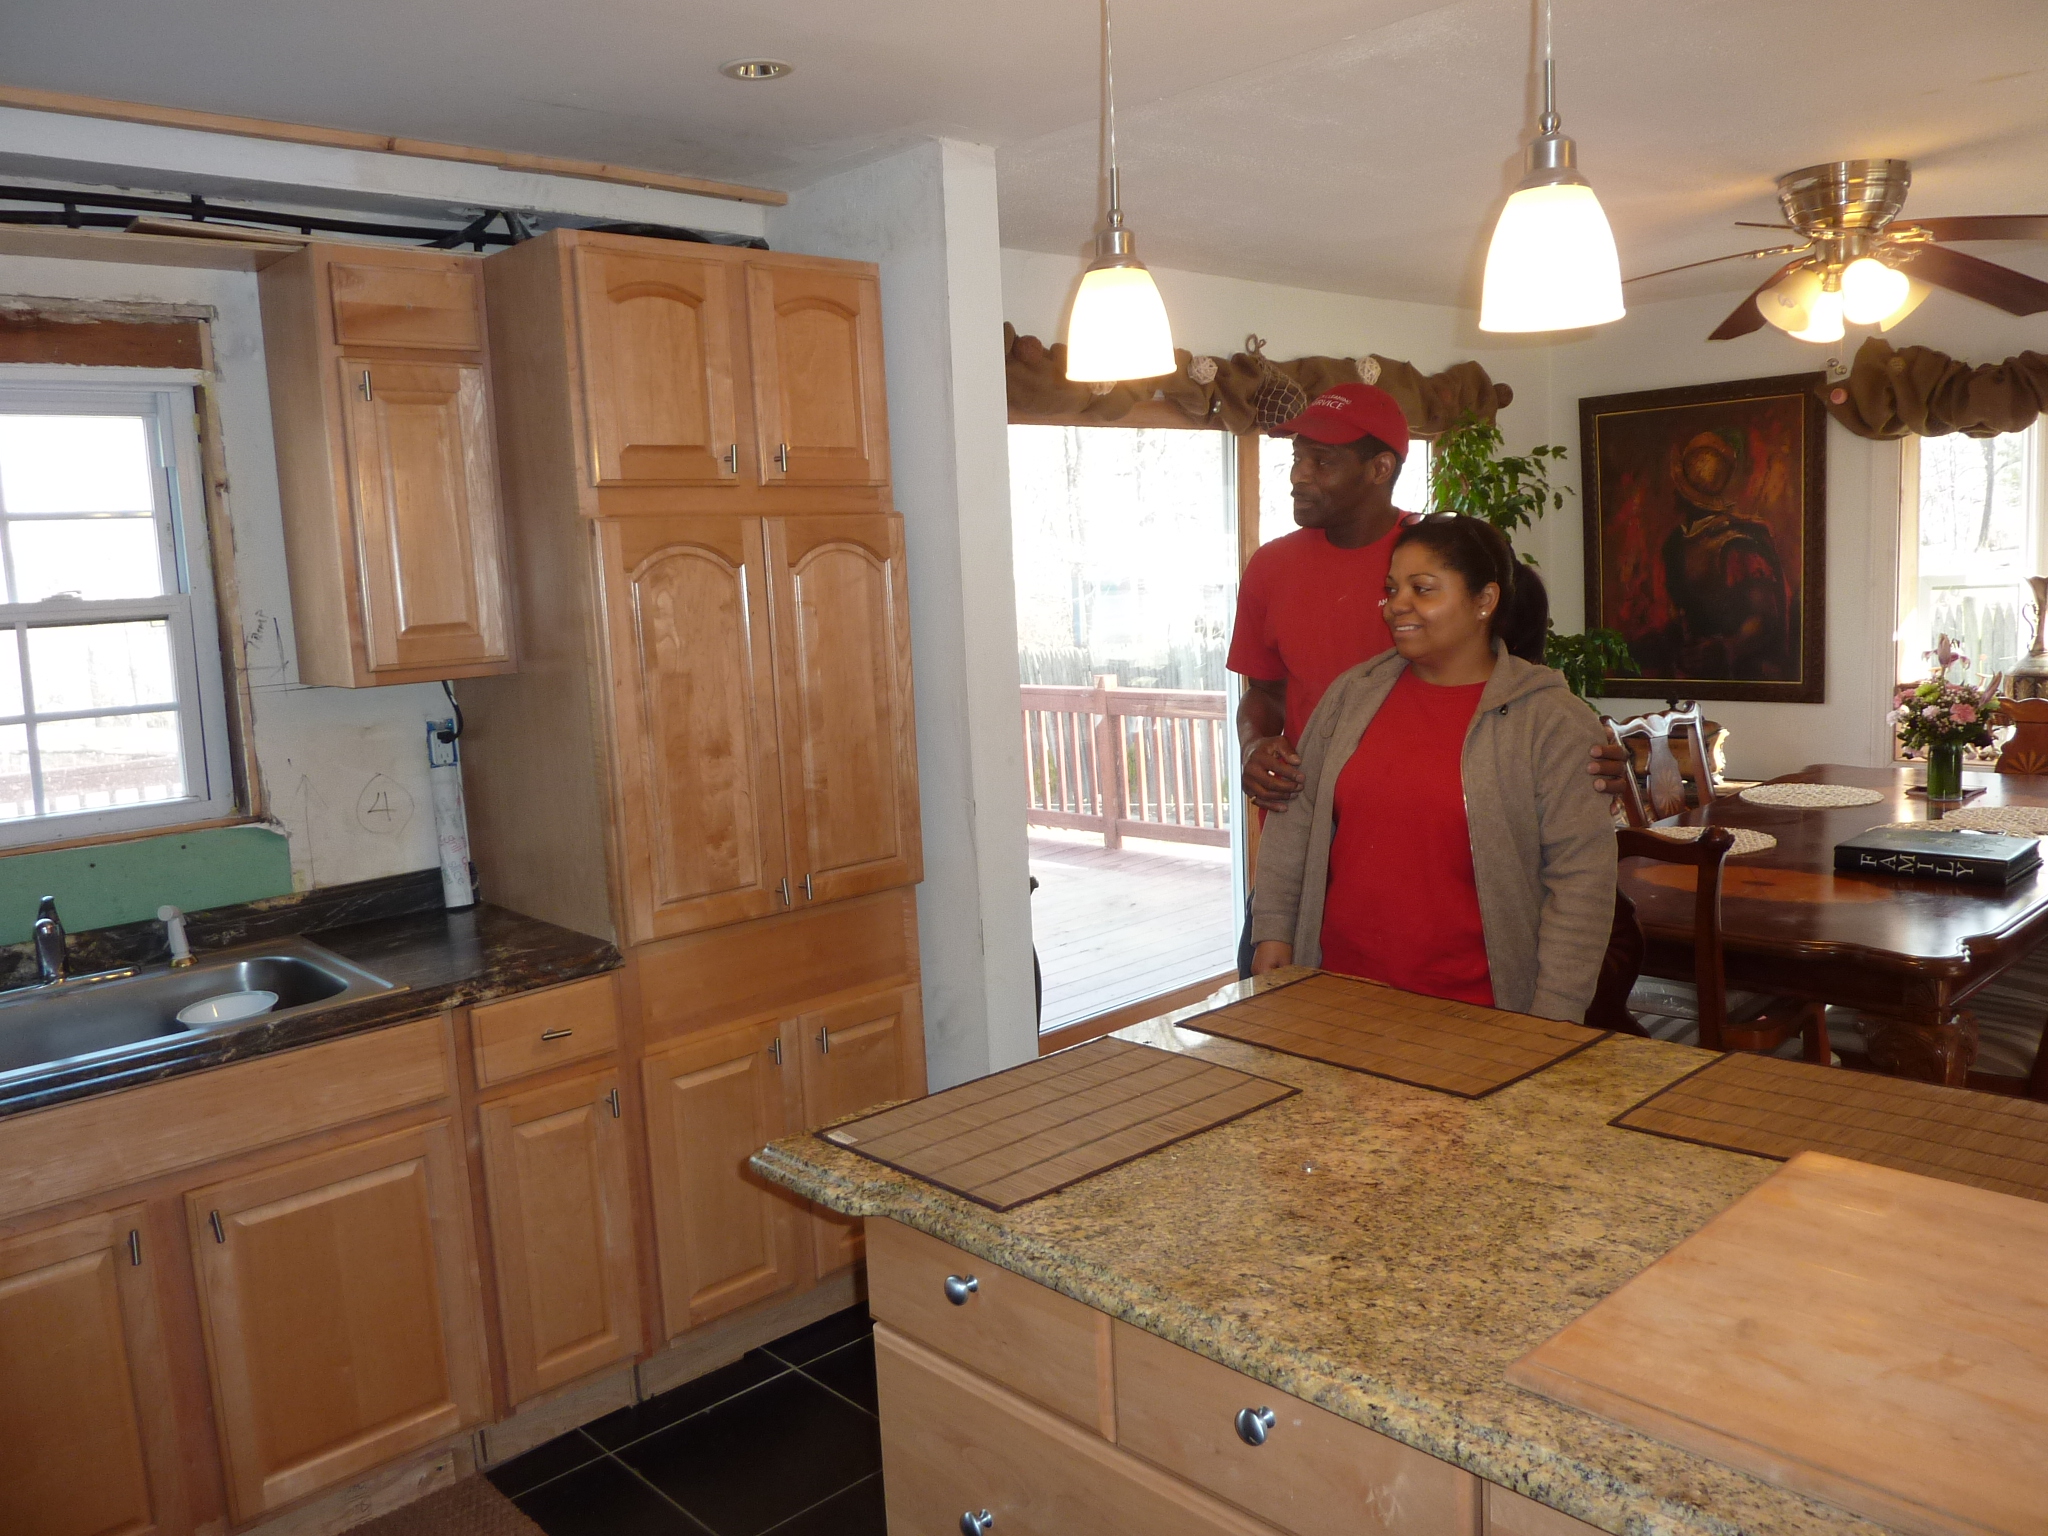 The new layout of the kitchen gives Earl and Ana's home a more open feeling.